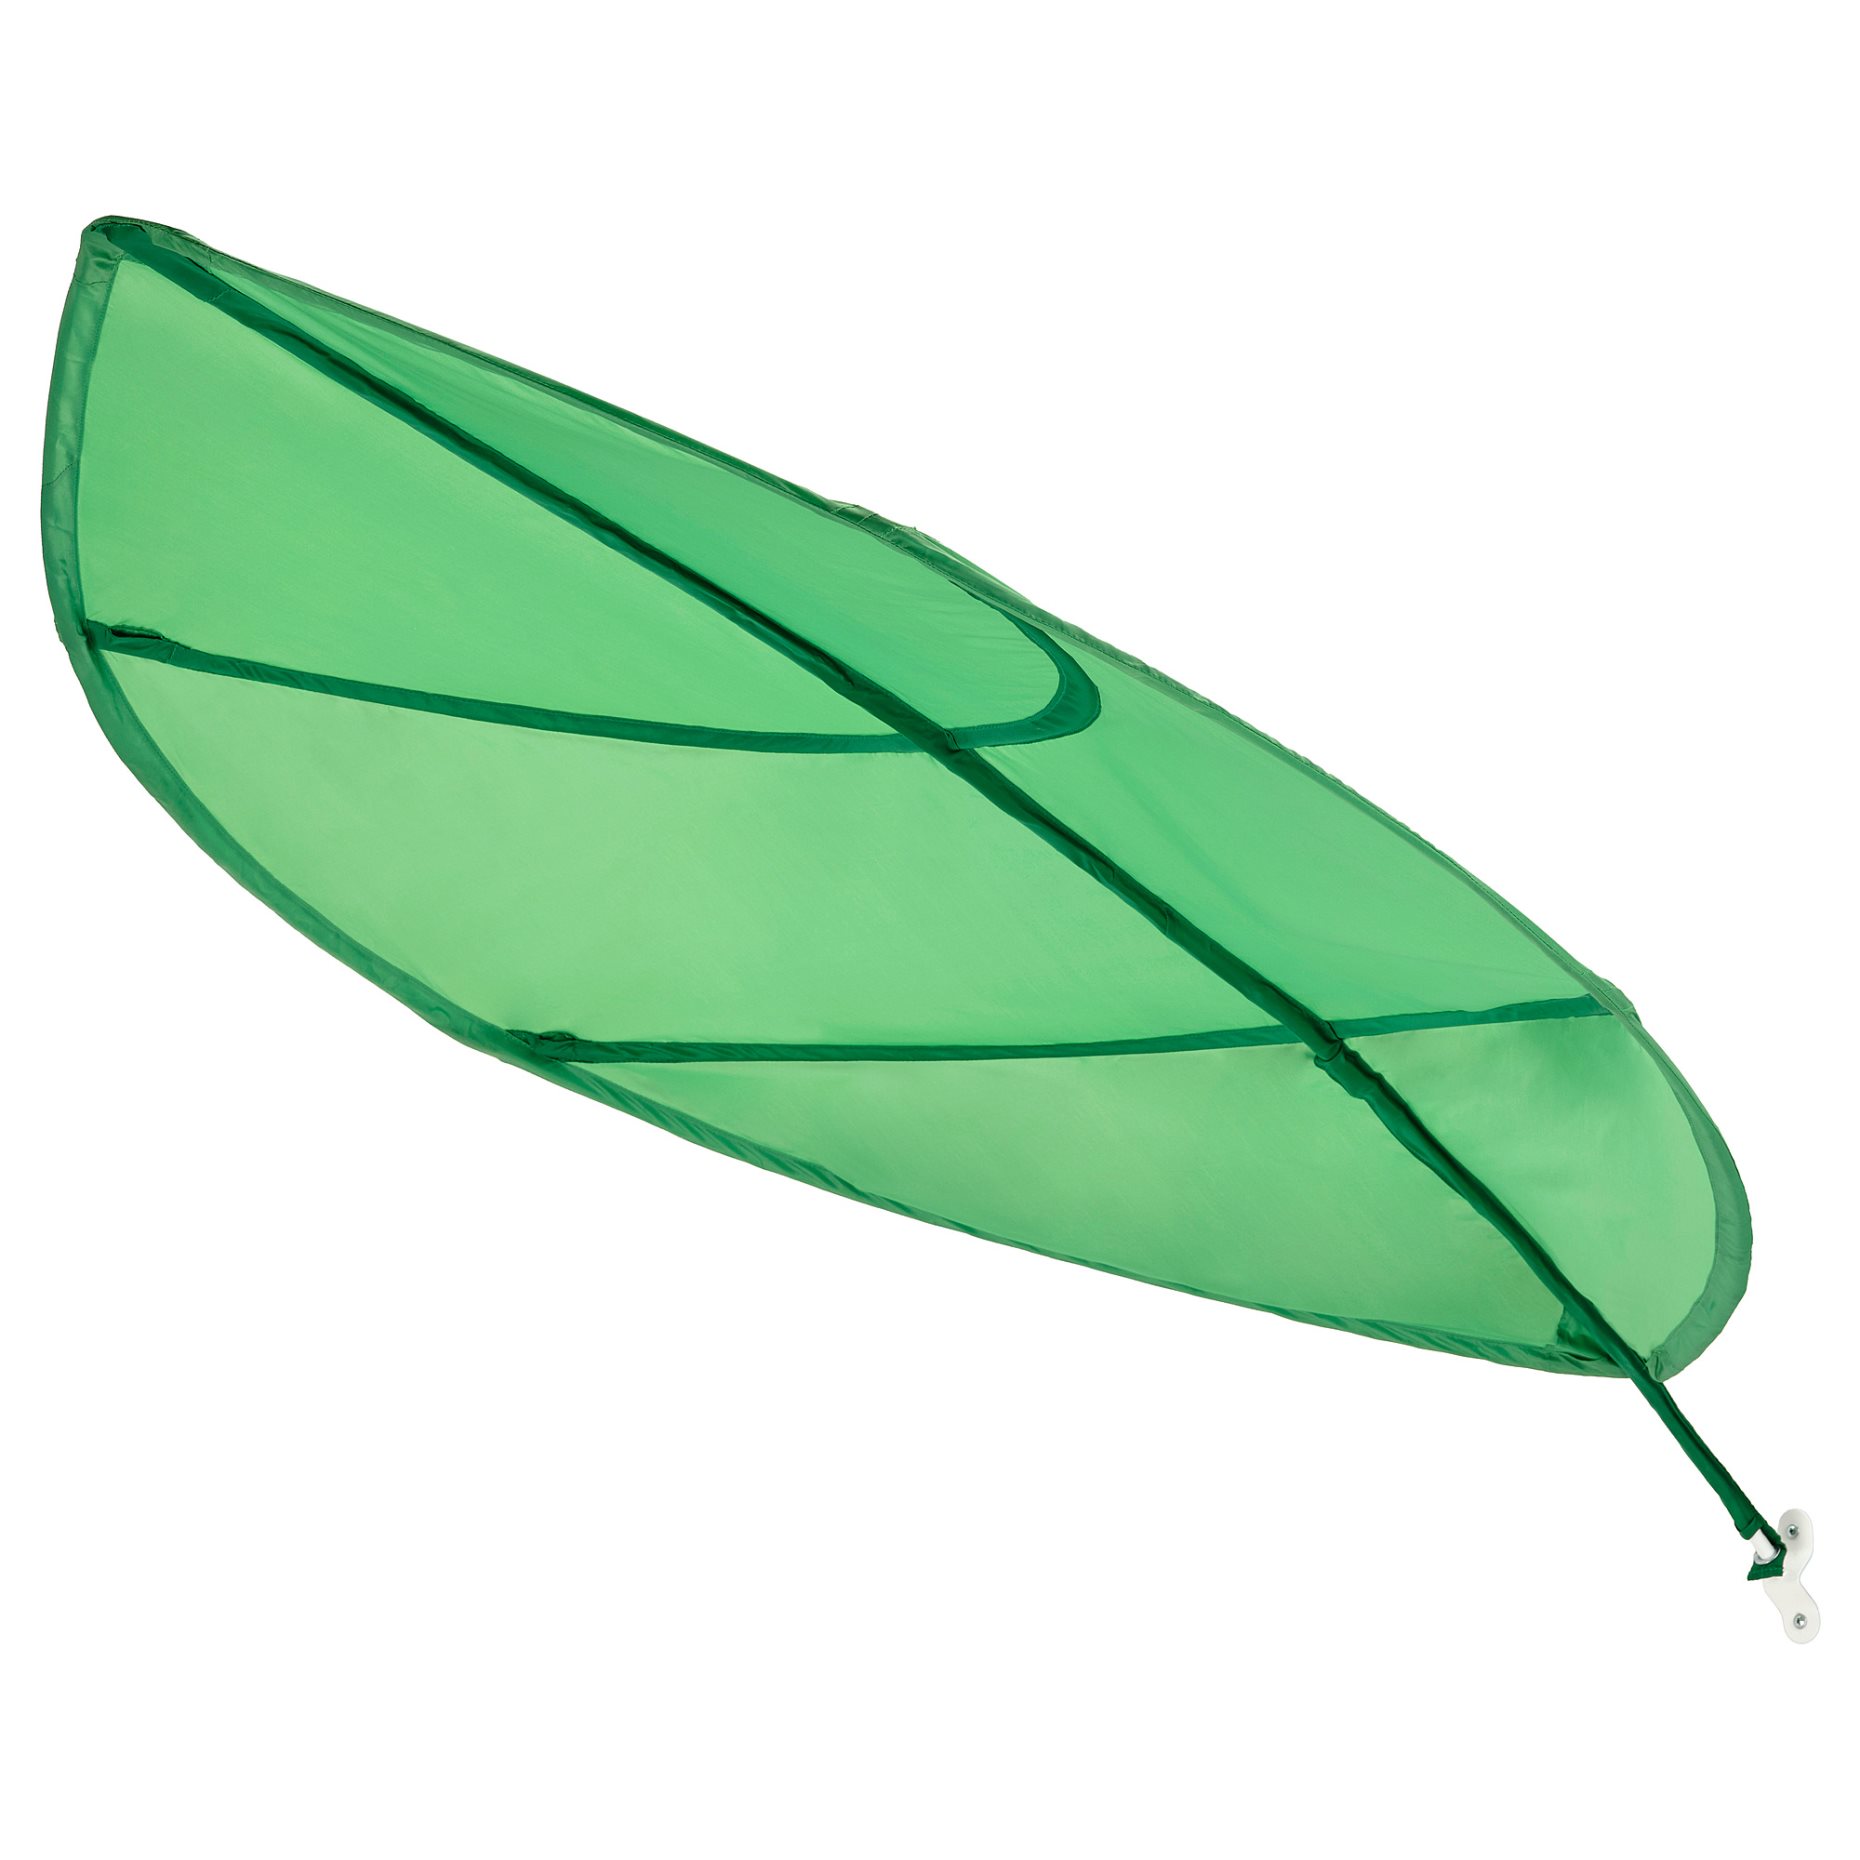 LÖVA, bed canopy/leaf, 805.421.26